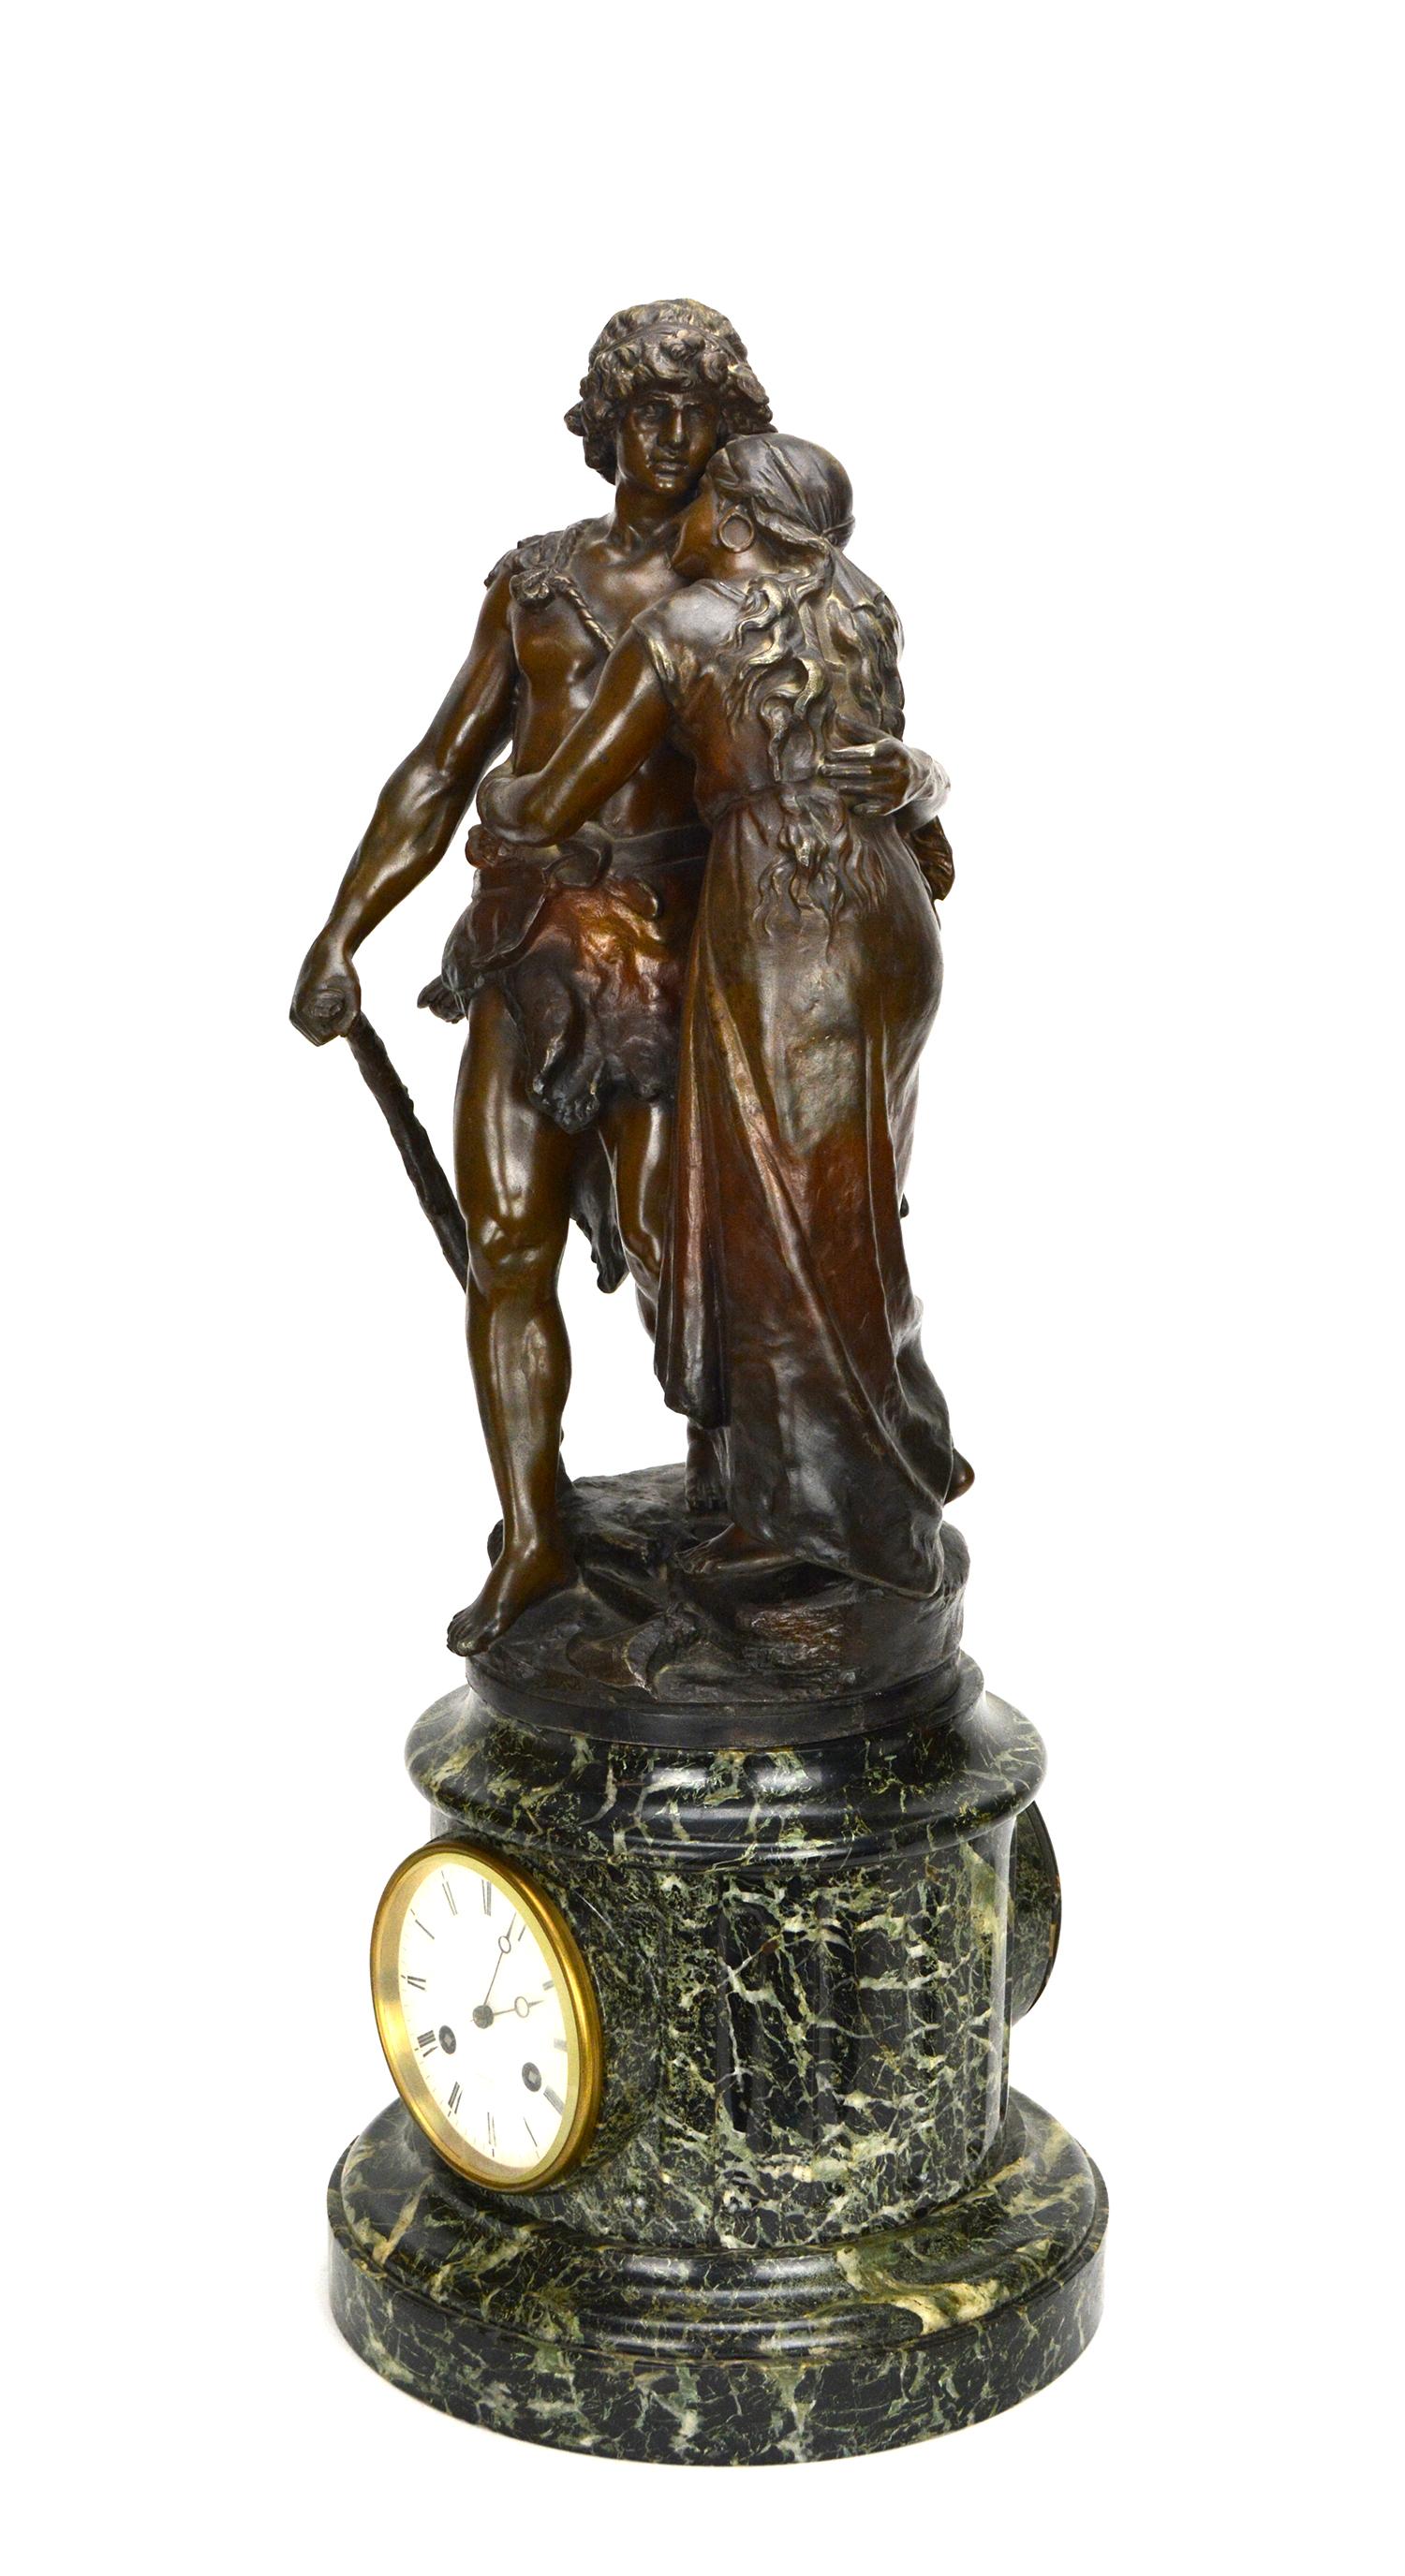 Large French 19th century Bronze Intimate Couple Figure Marble Base 8 Day Mantle Clock.

This is an amazing 19th century French tall figure marble mantle clock. The intimate couple are standing on a round green marble base, with a clock housed